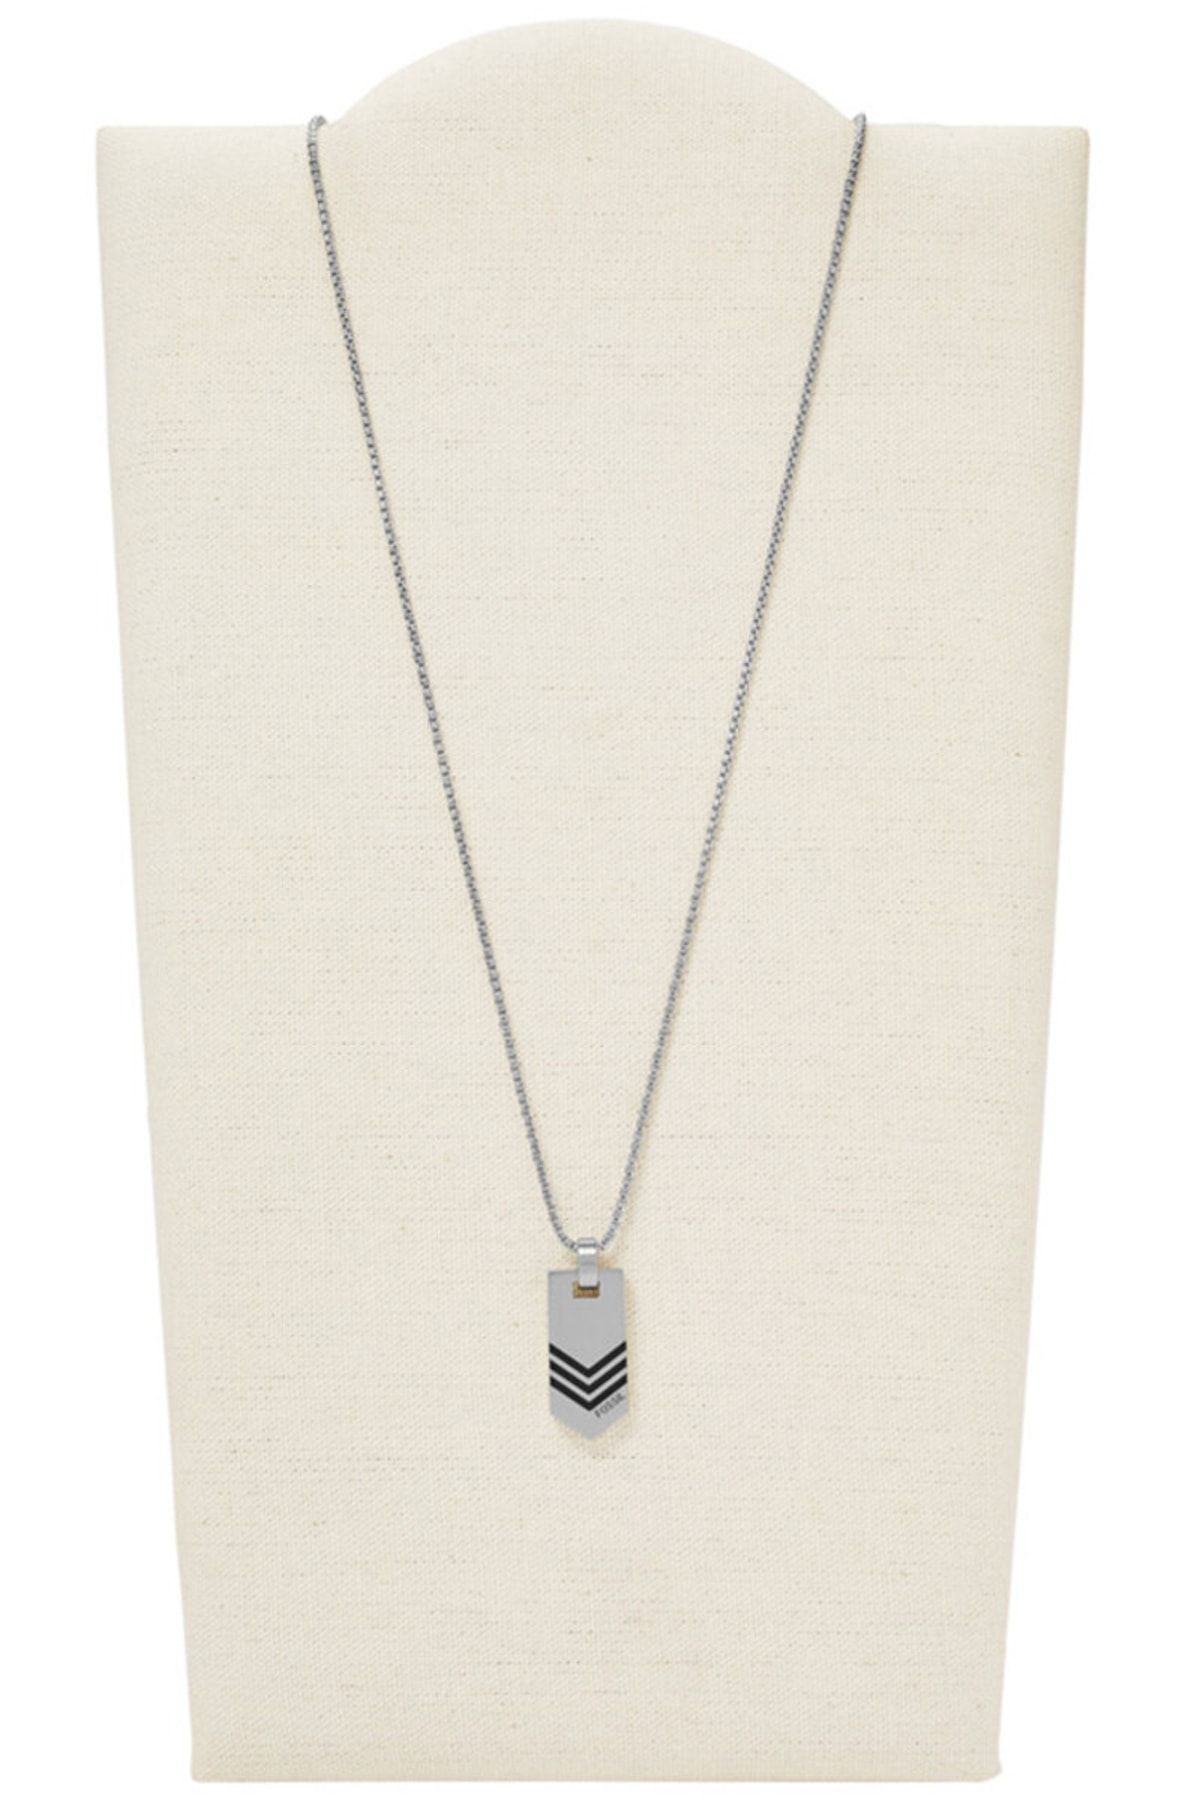 FOSSIL MENS DRESS | Silver Men's Necklace | YOOX